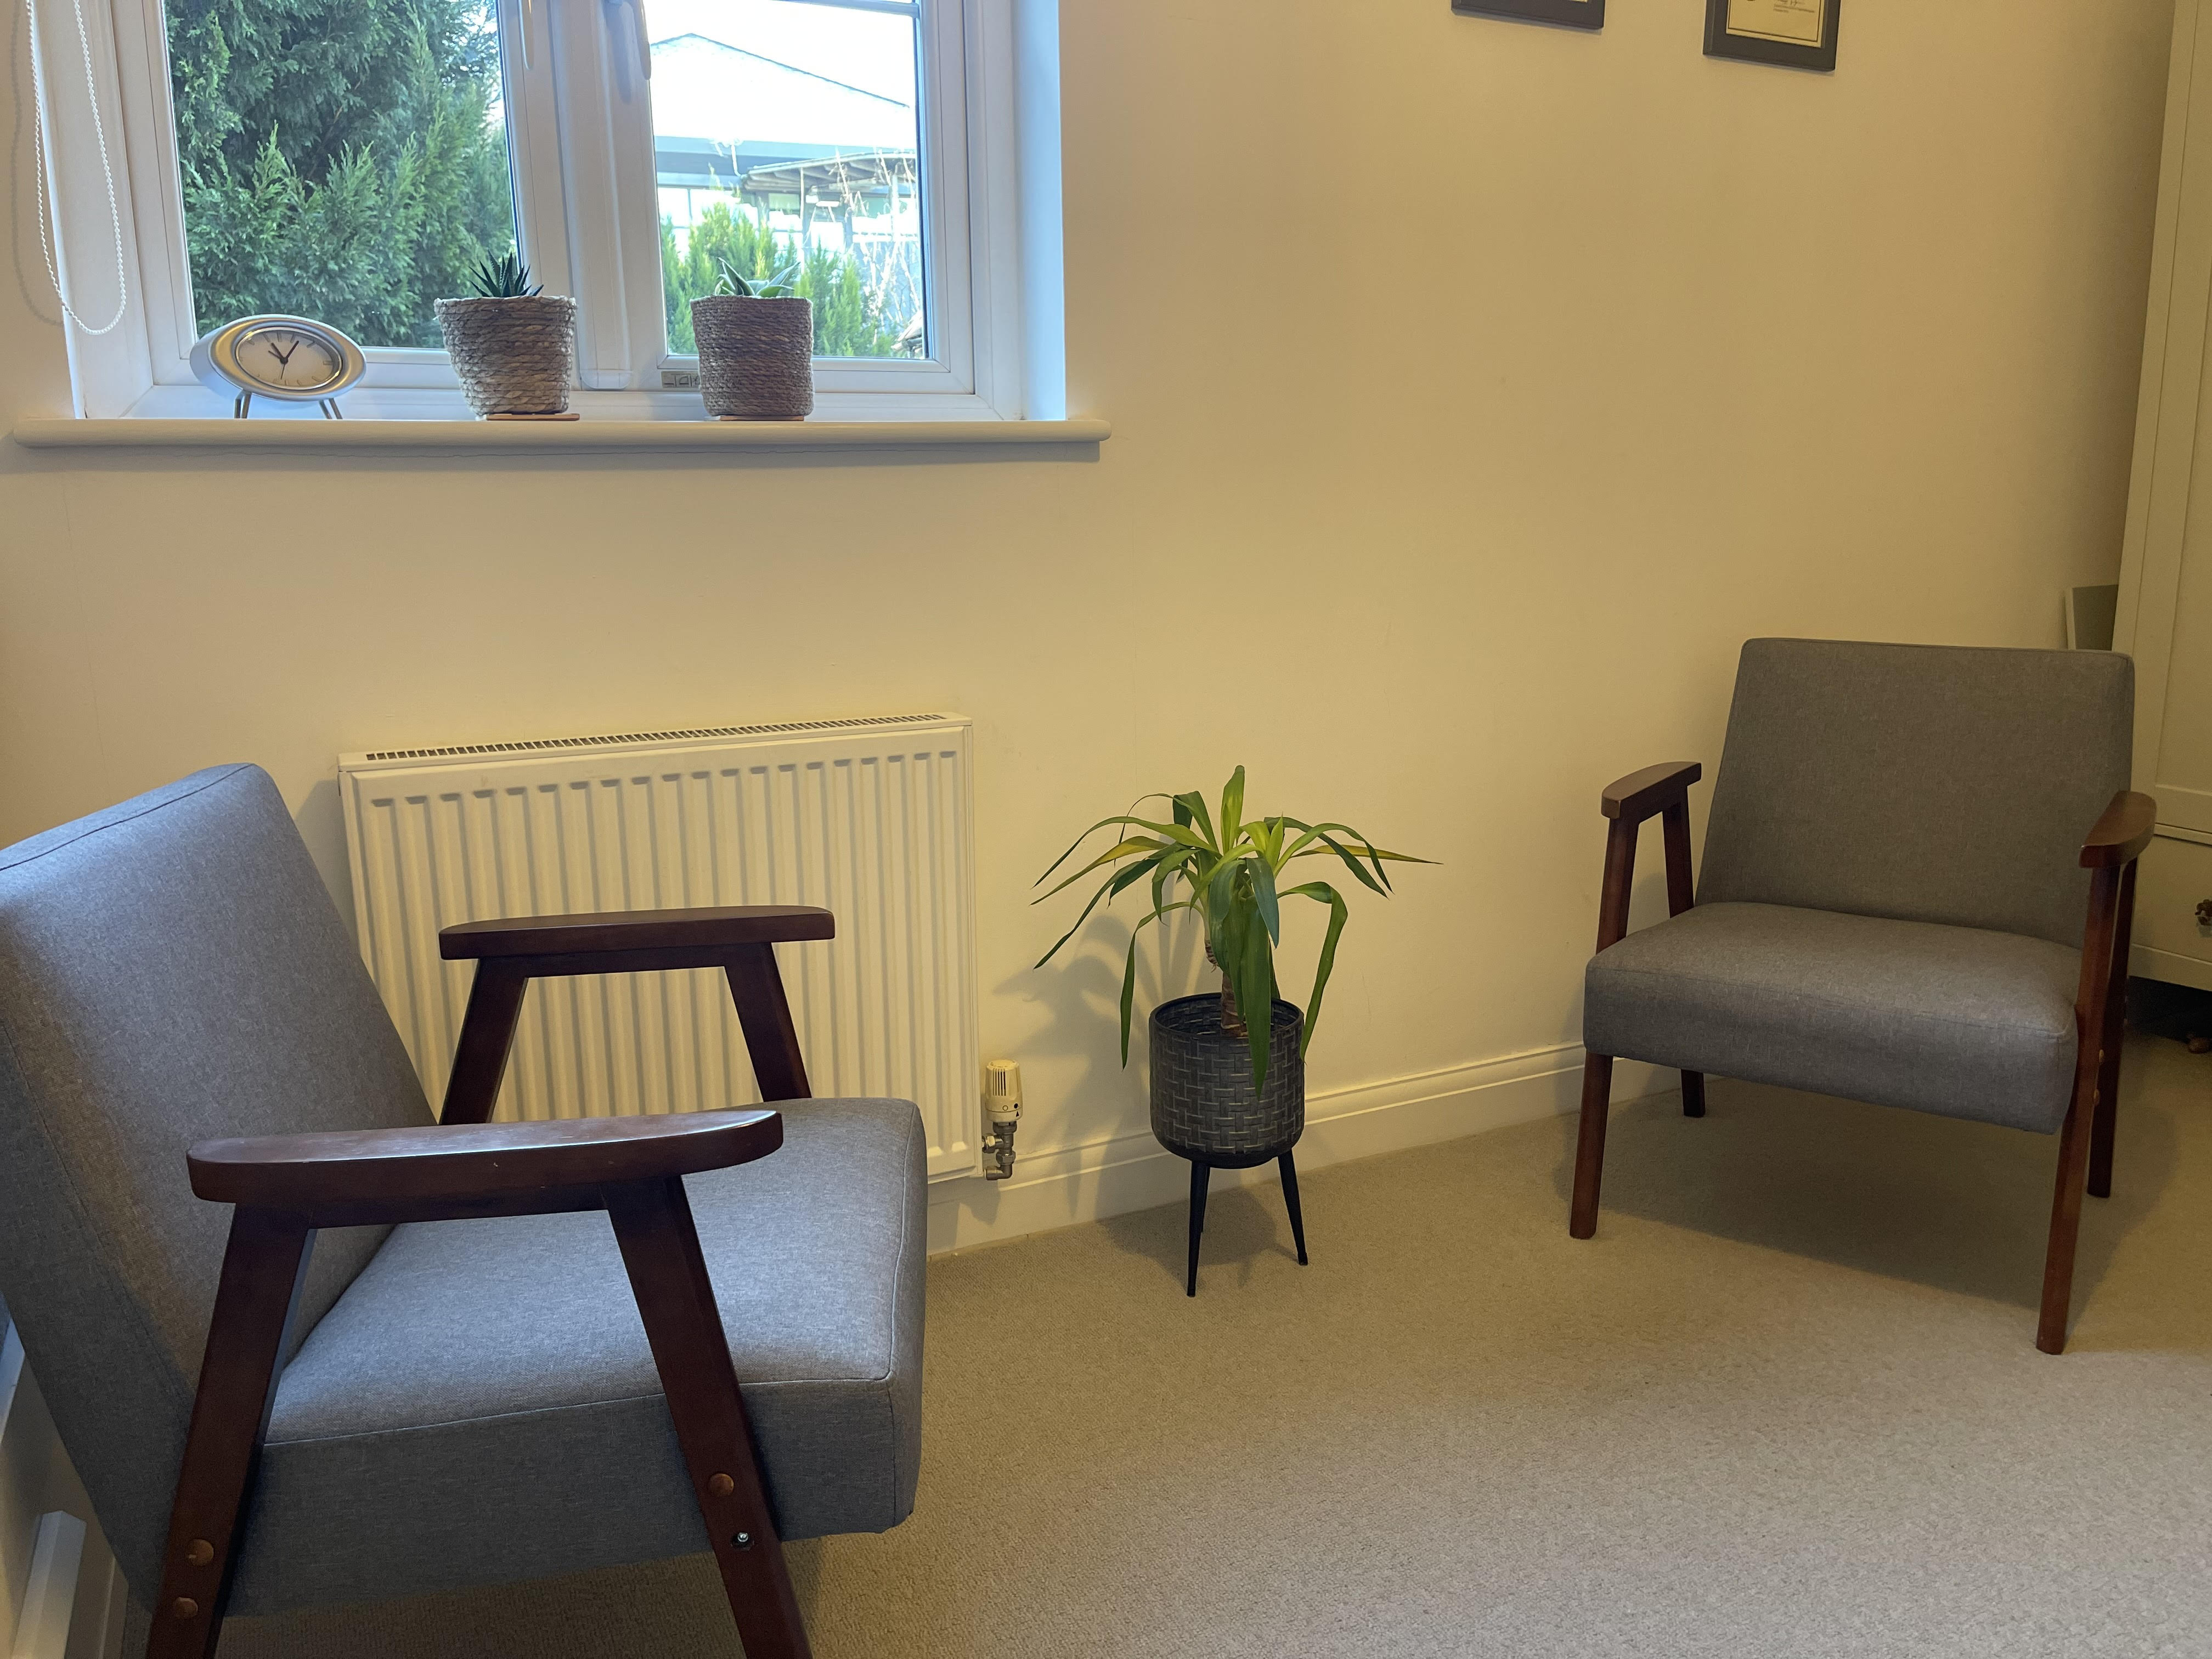 The counselling room